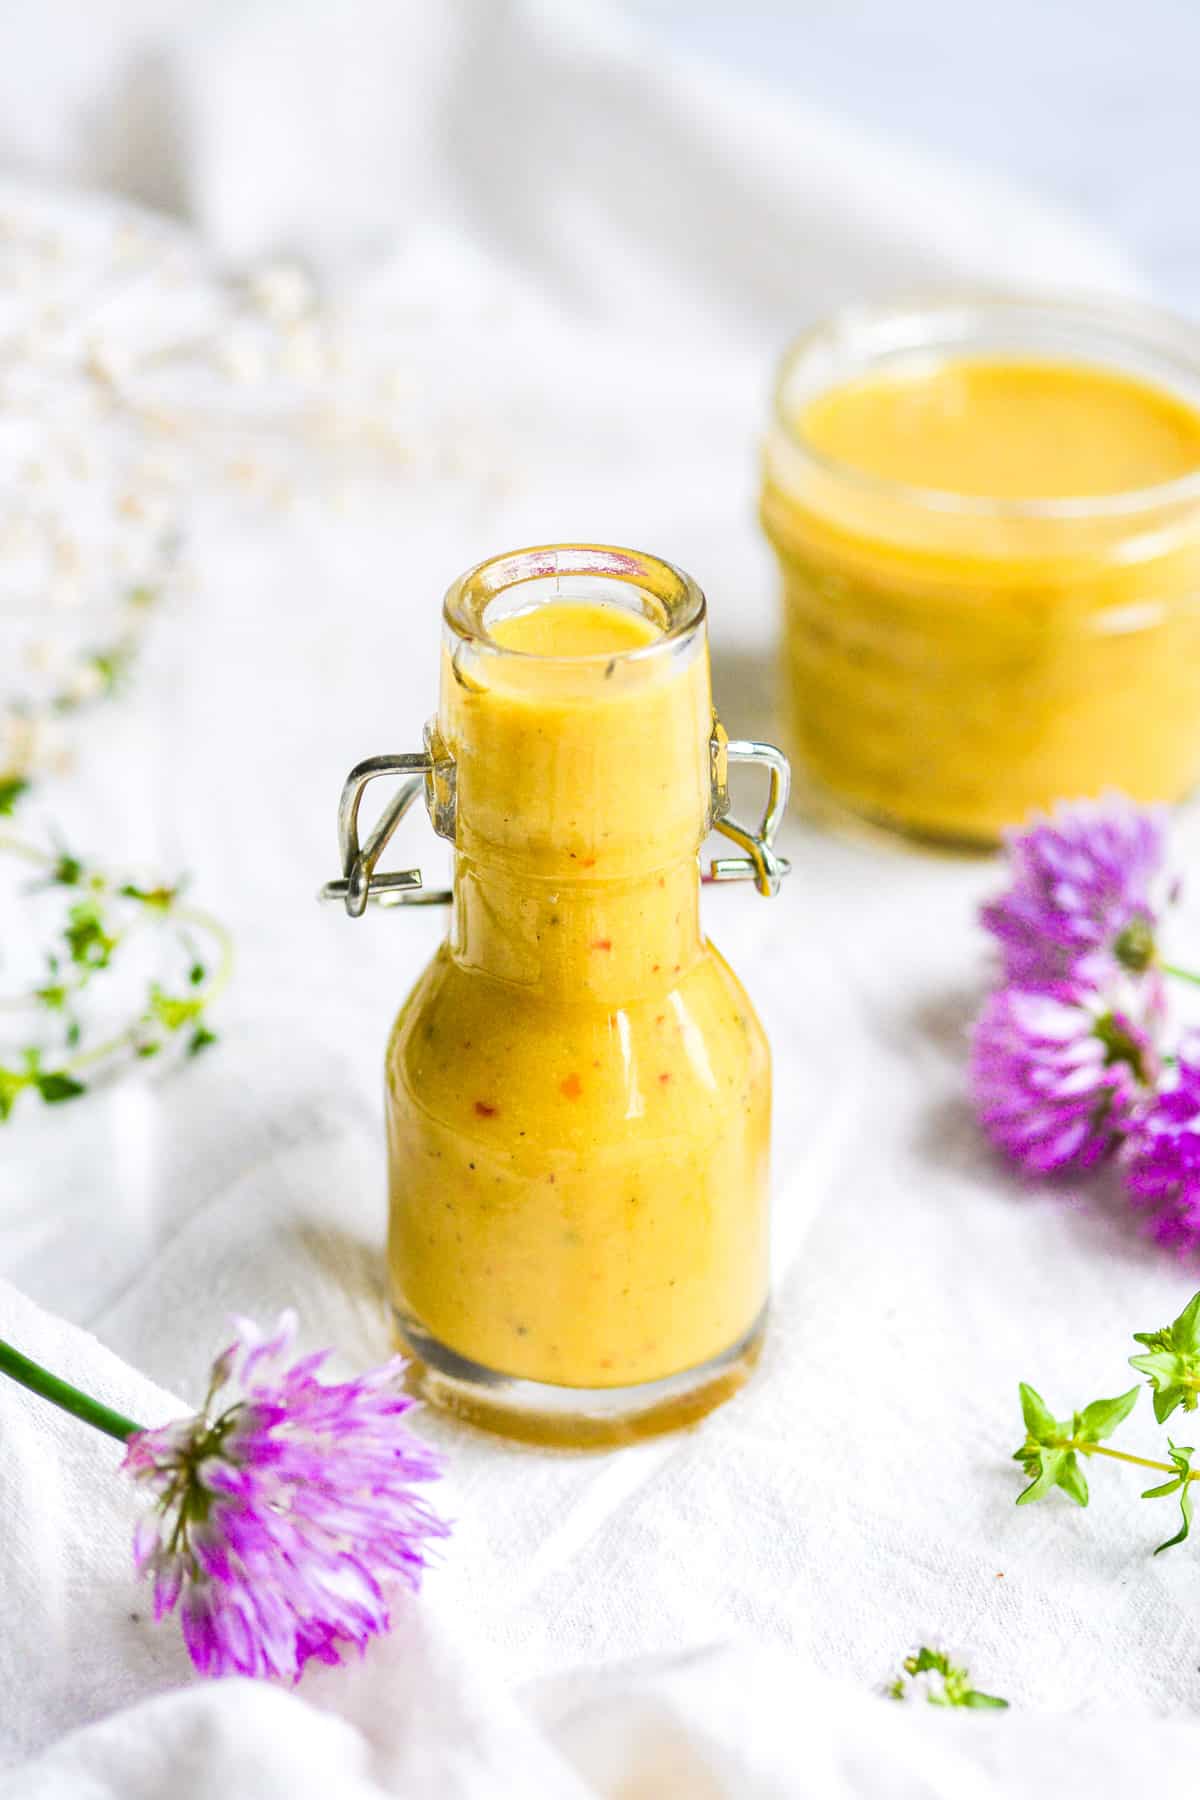 Vegan Honey Mustard Dressing in a small jar on a white cloth with purple flowers in the foreground.